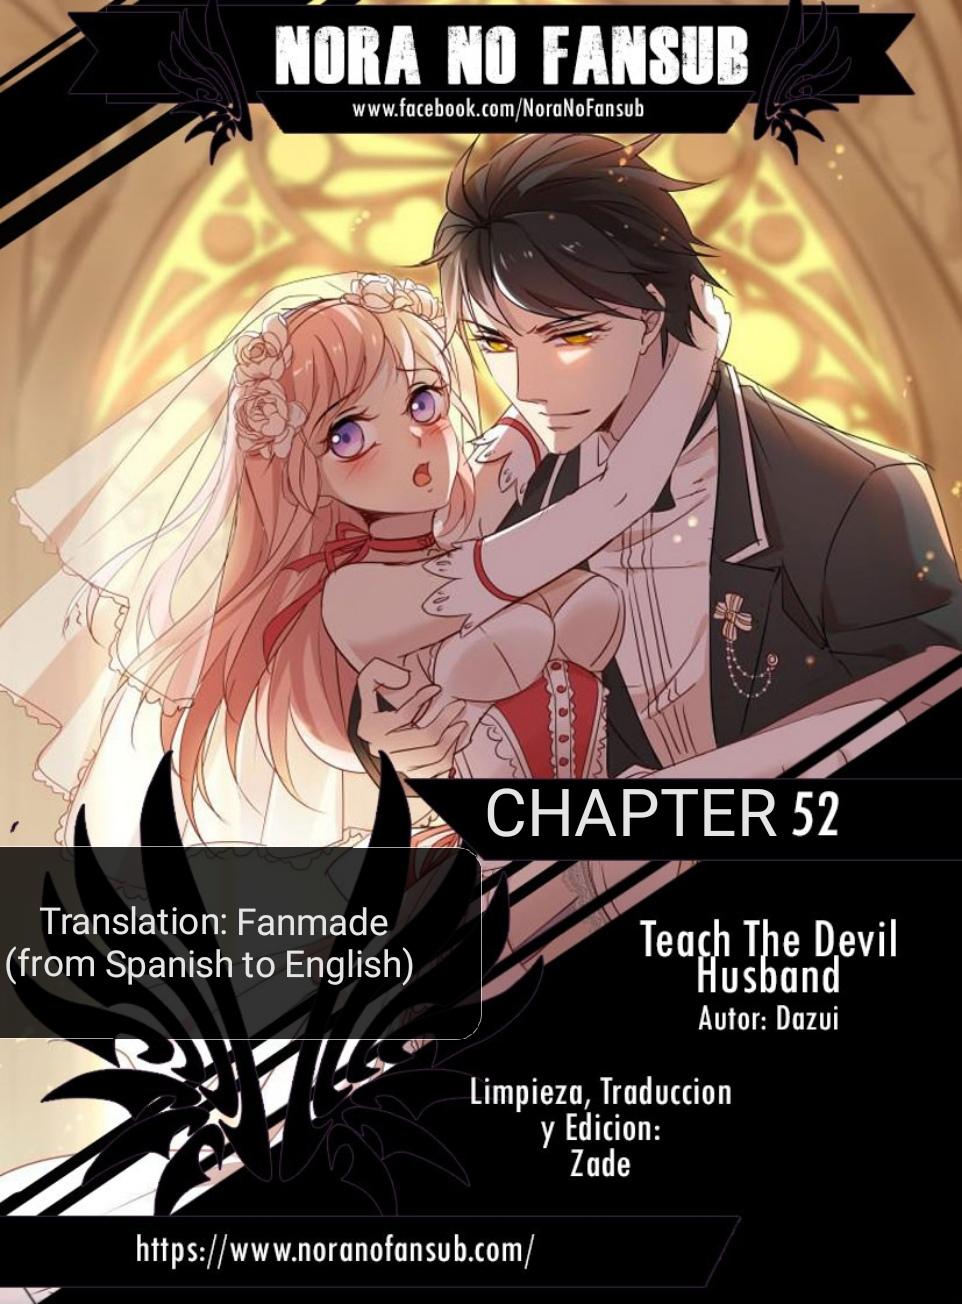 Teach The Devil Husband Chapter 52 page 1